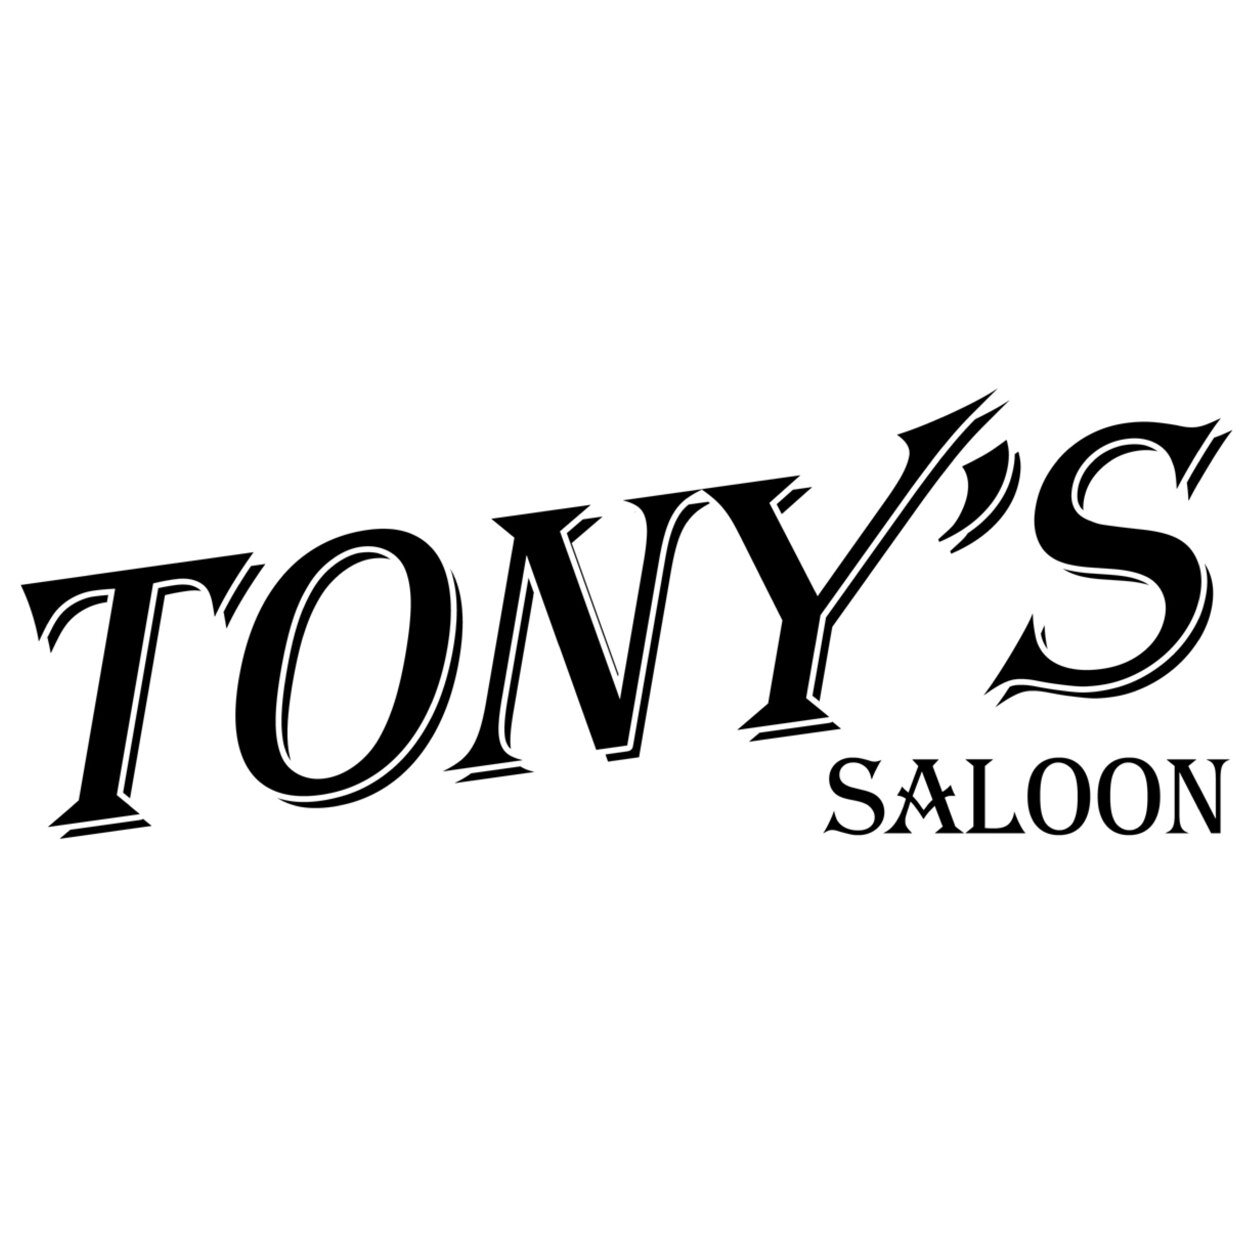 Your local Saloon, over 150 spirits, great cocktails, beer, pool, music...